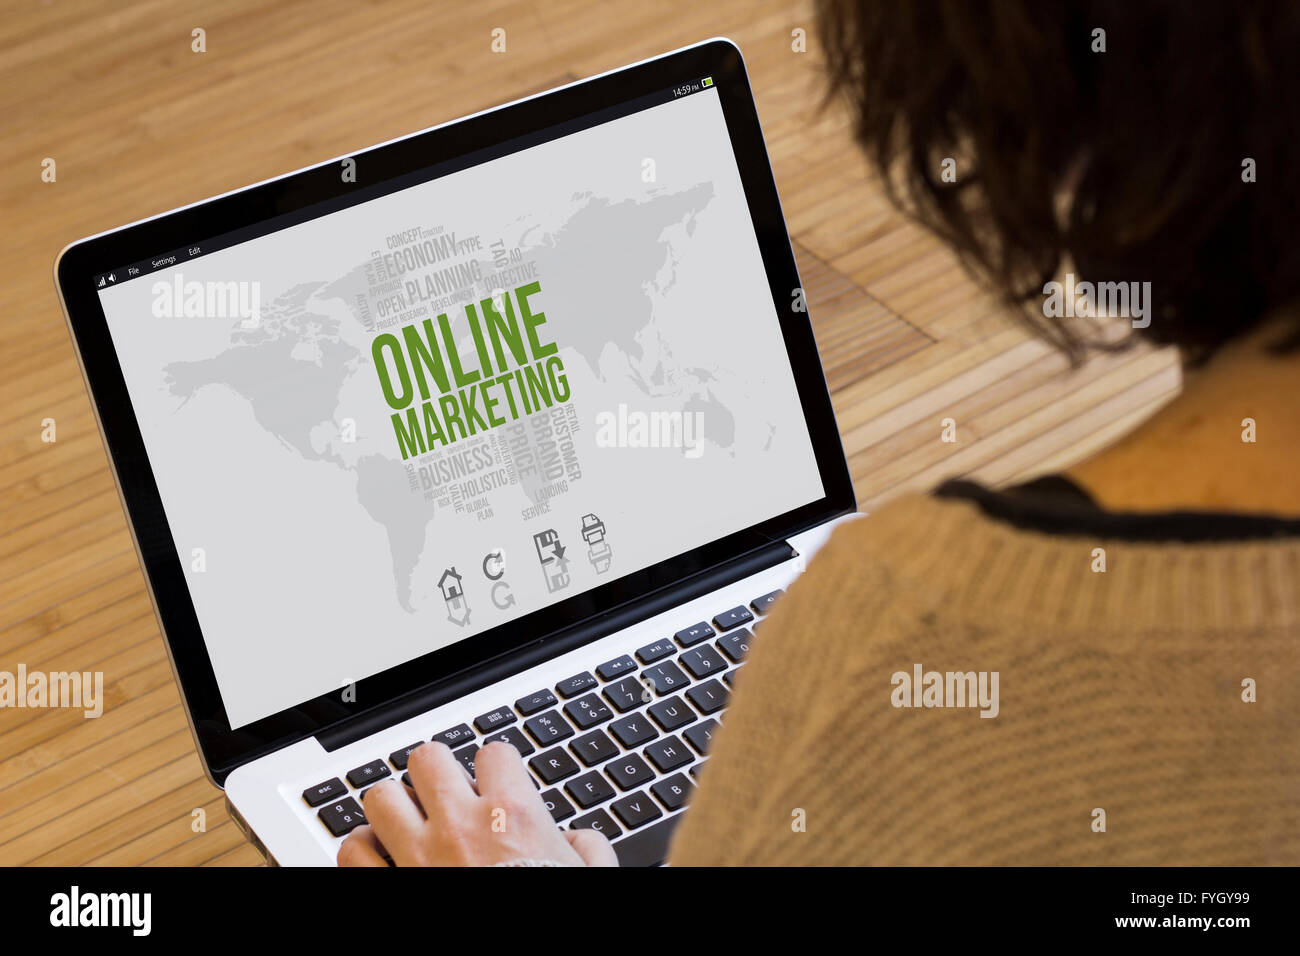 marketing online concept: marketing online on a laptop screen. Screen graphics are made up. Stock Photo